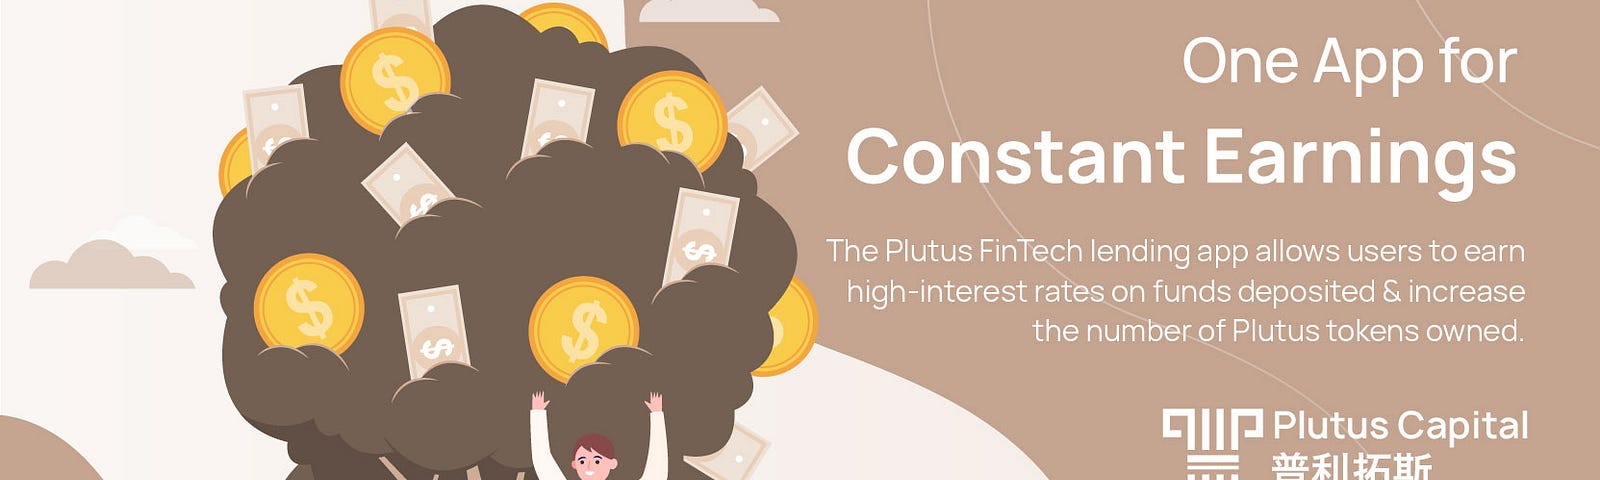 One App for Constant Earnings, Plutus Capital